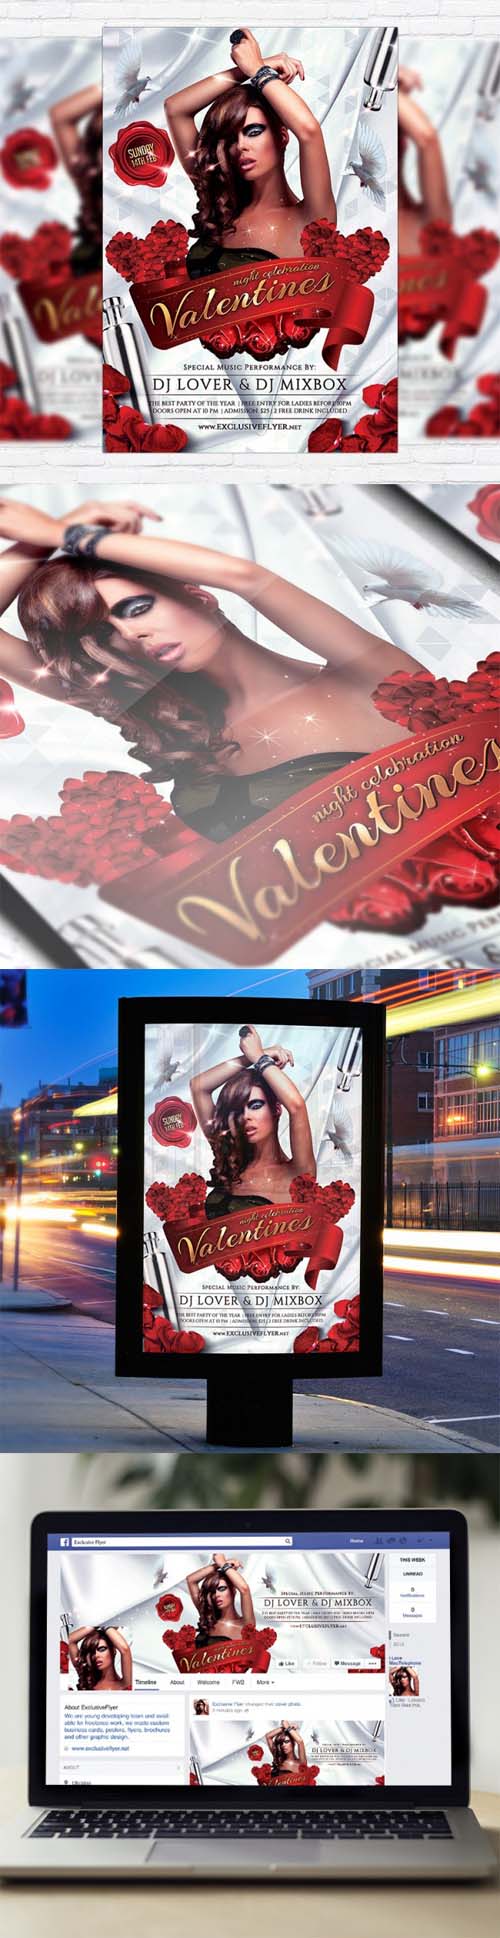 Flyer Template - Valentines Night Celebration + Facebook Cover 6